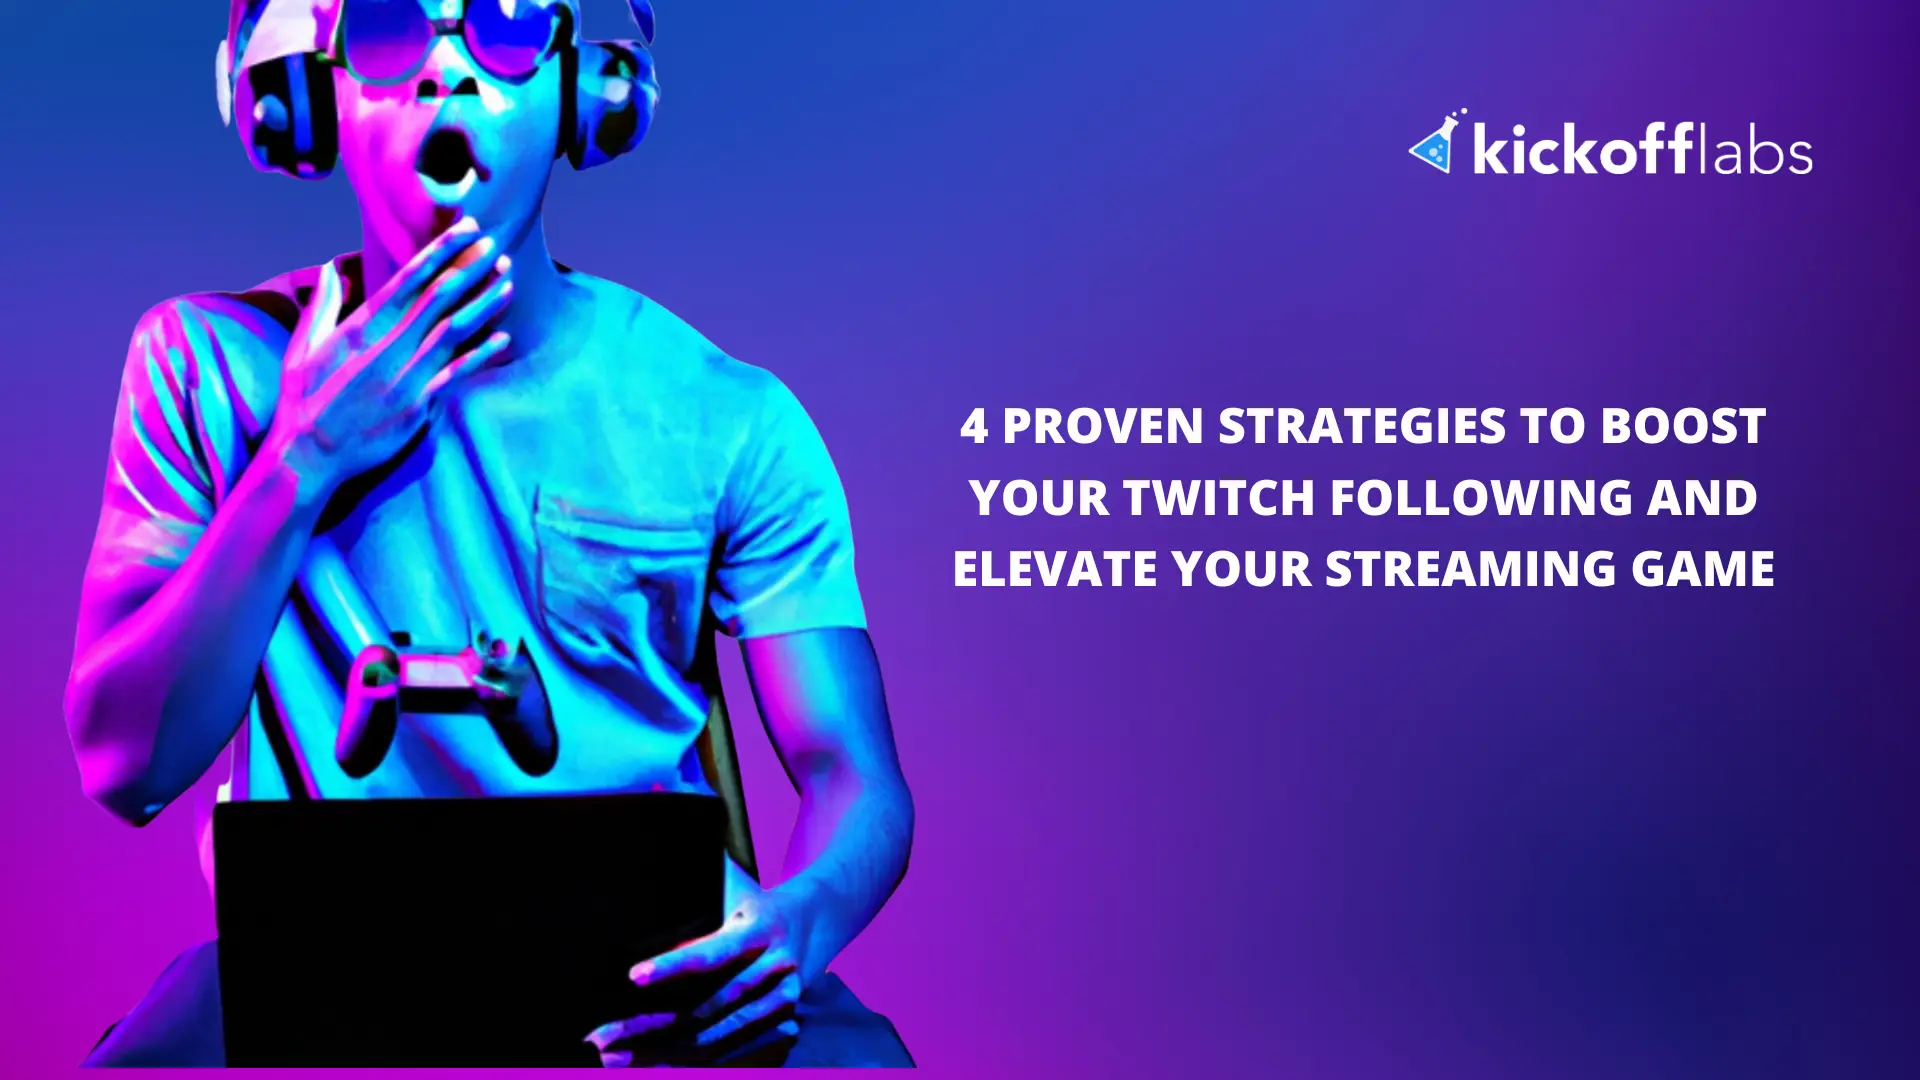 4 Proven Strategies to Boost Your Twitch Following and Elevate Your Streaming Game